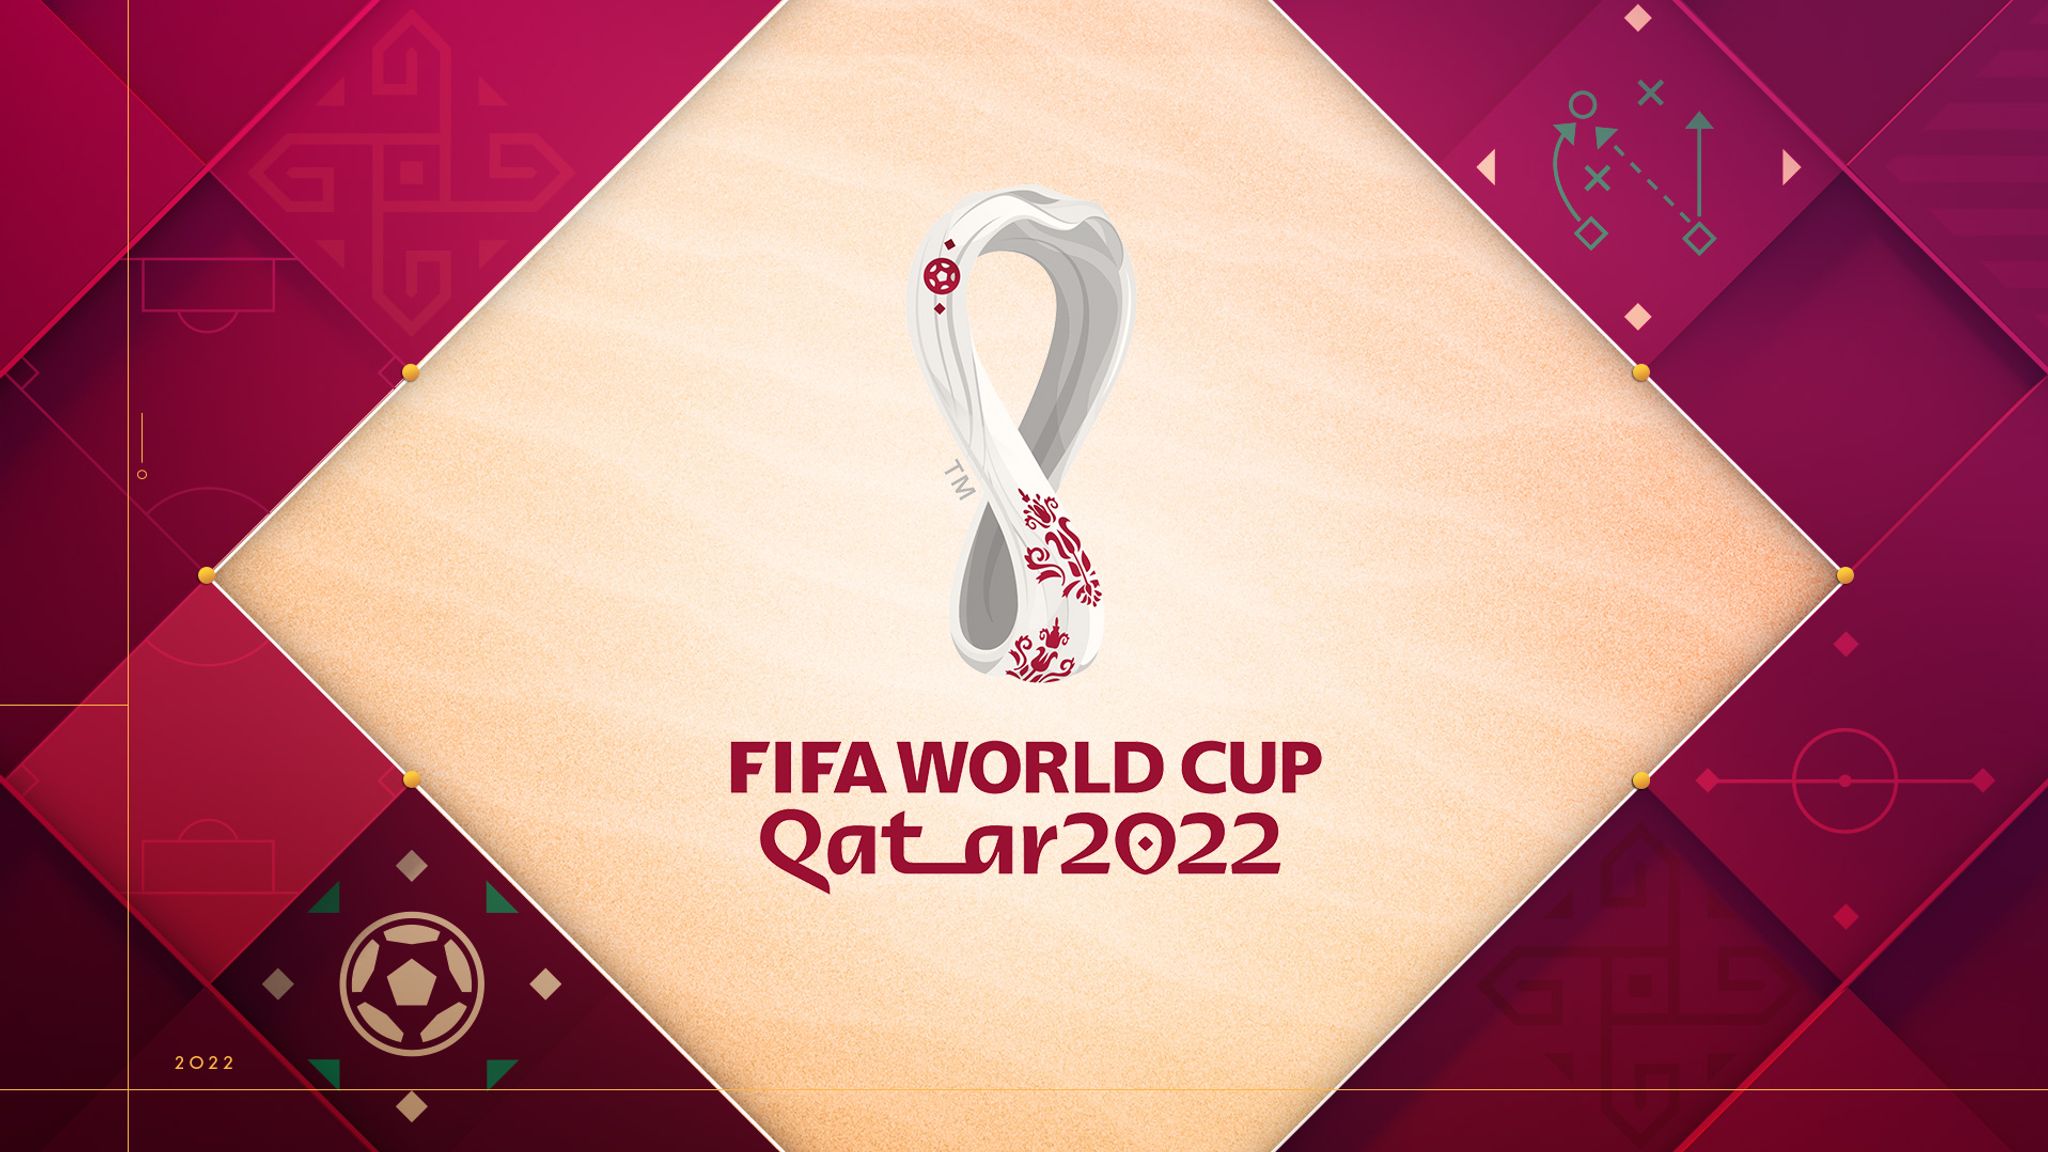 It is the official emblem of the 2022 FIFA World Cup with the host country Qatar. crimson background